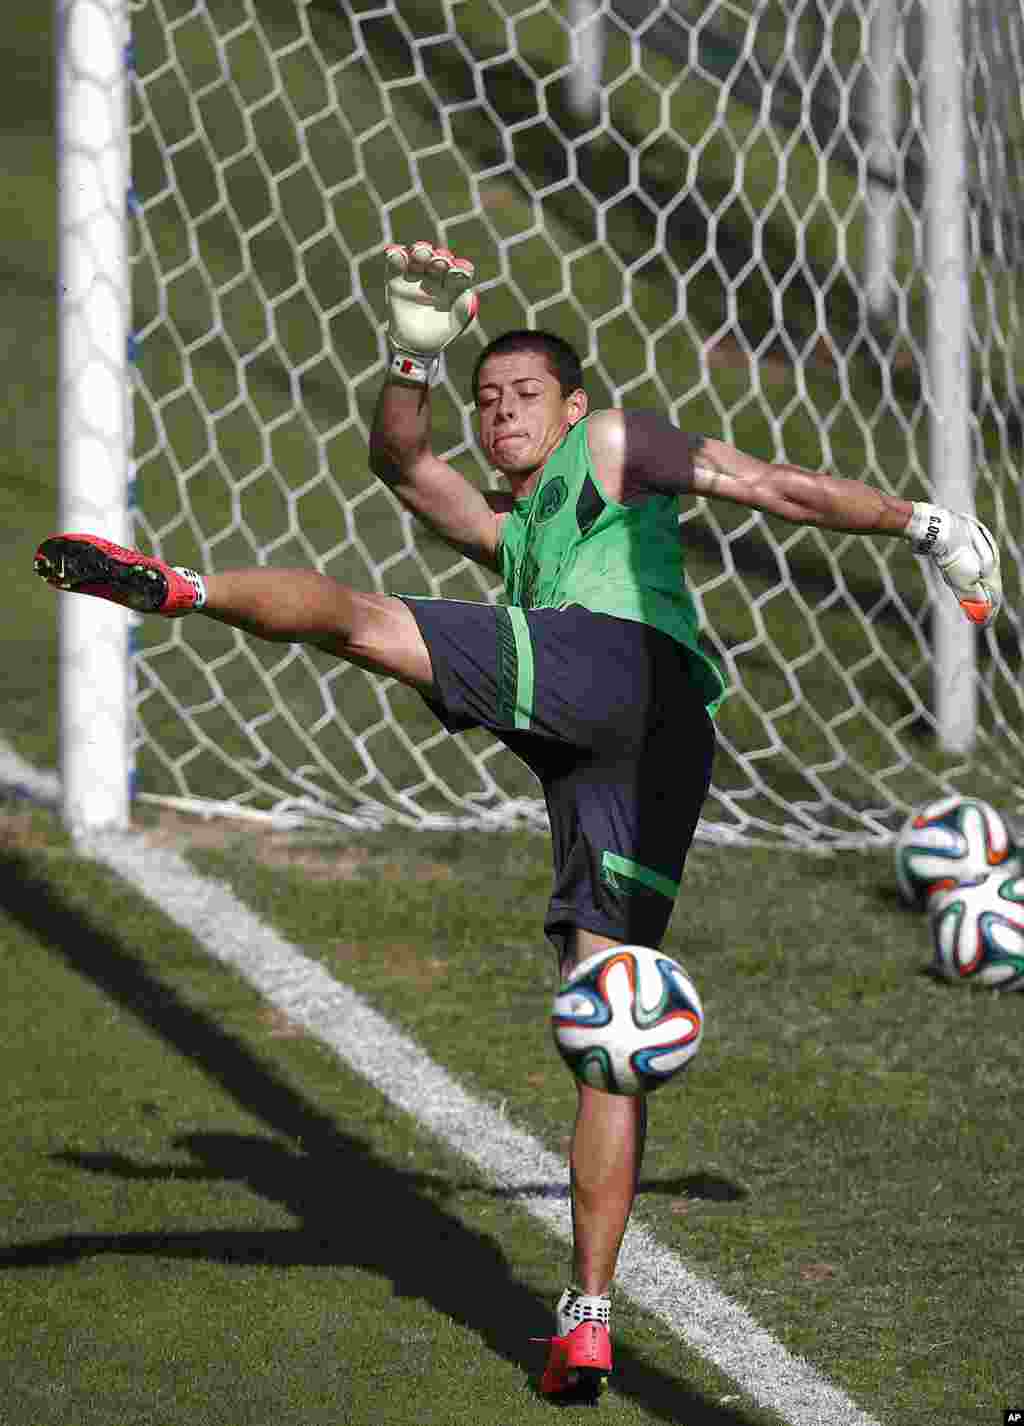 Mexico's national soccer player Javier Hernandez kicks the ball during a training session in Santos, Brazil, June 8, 2014. 